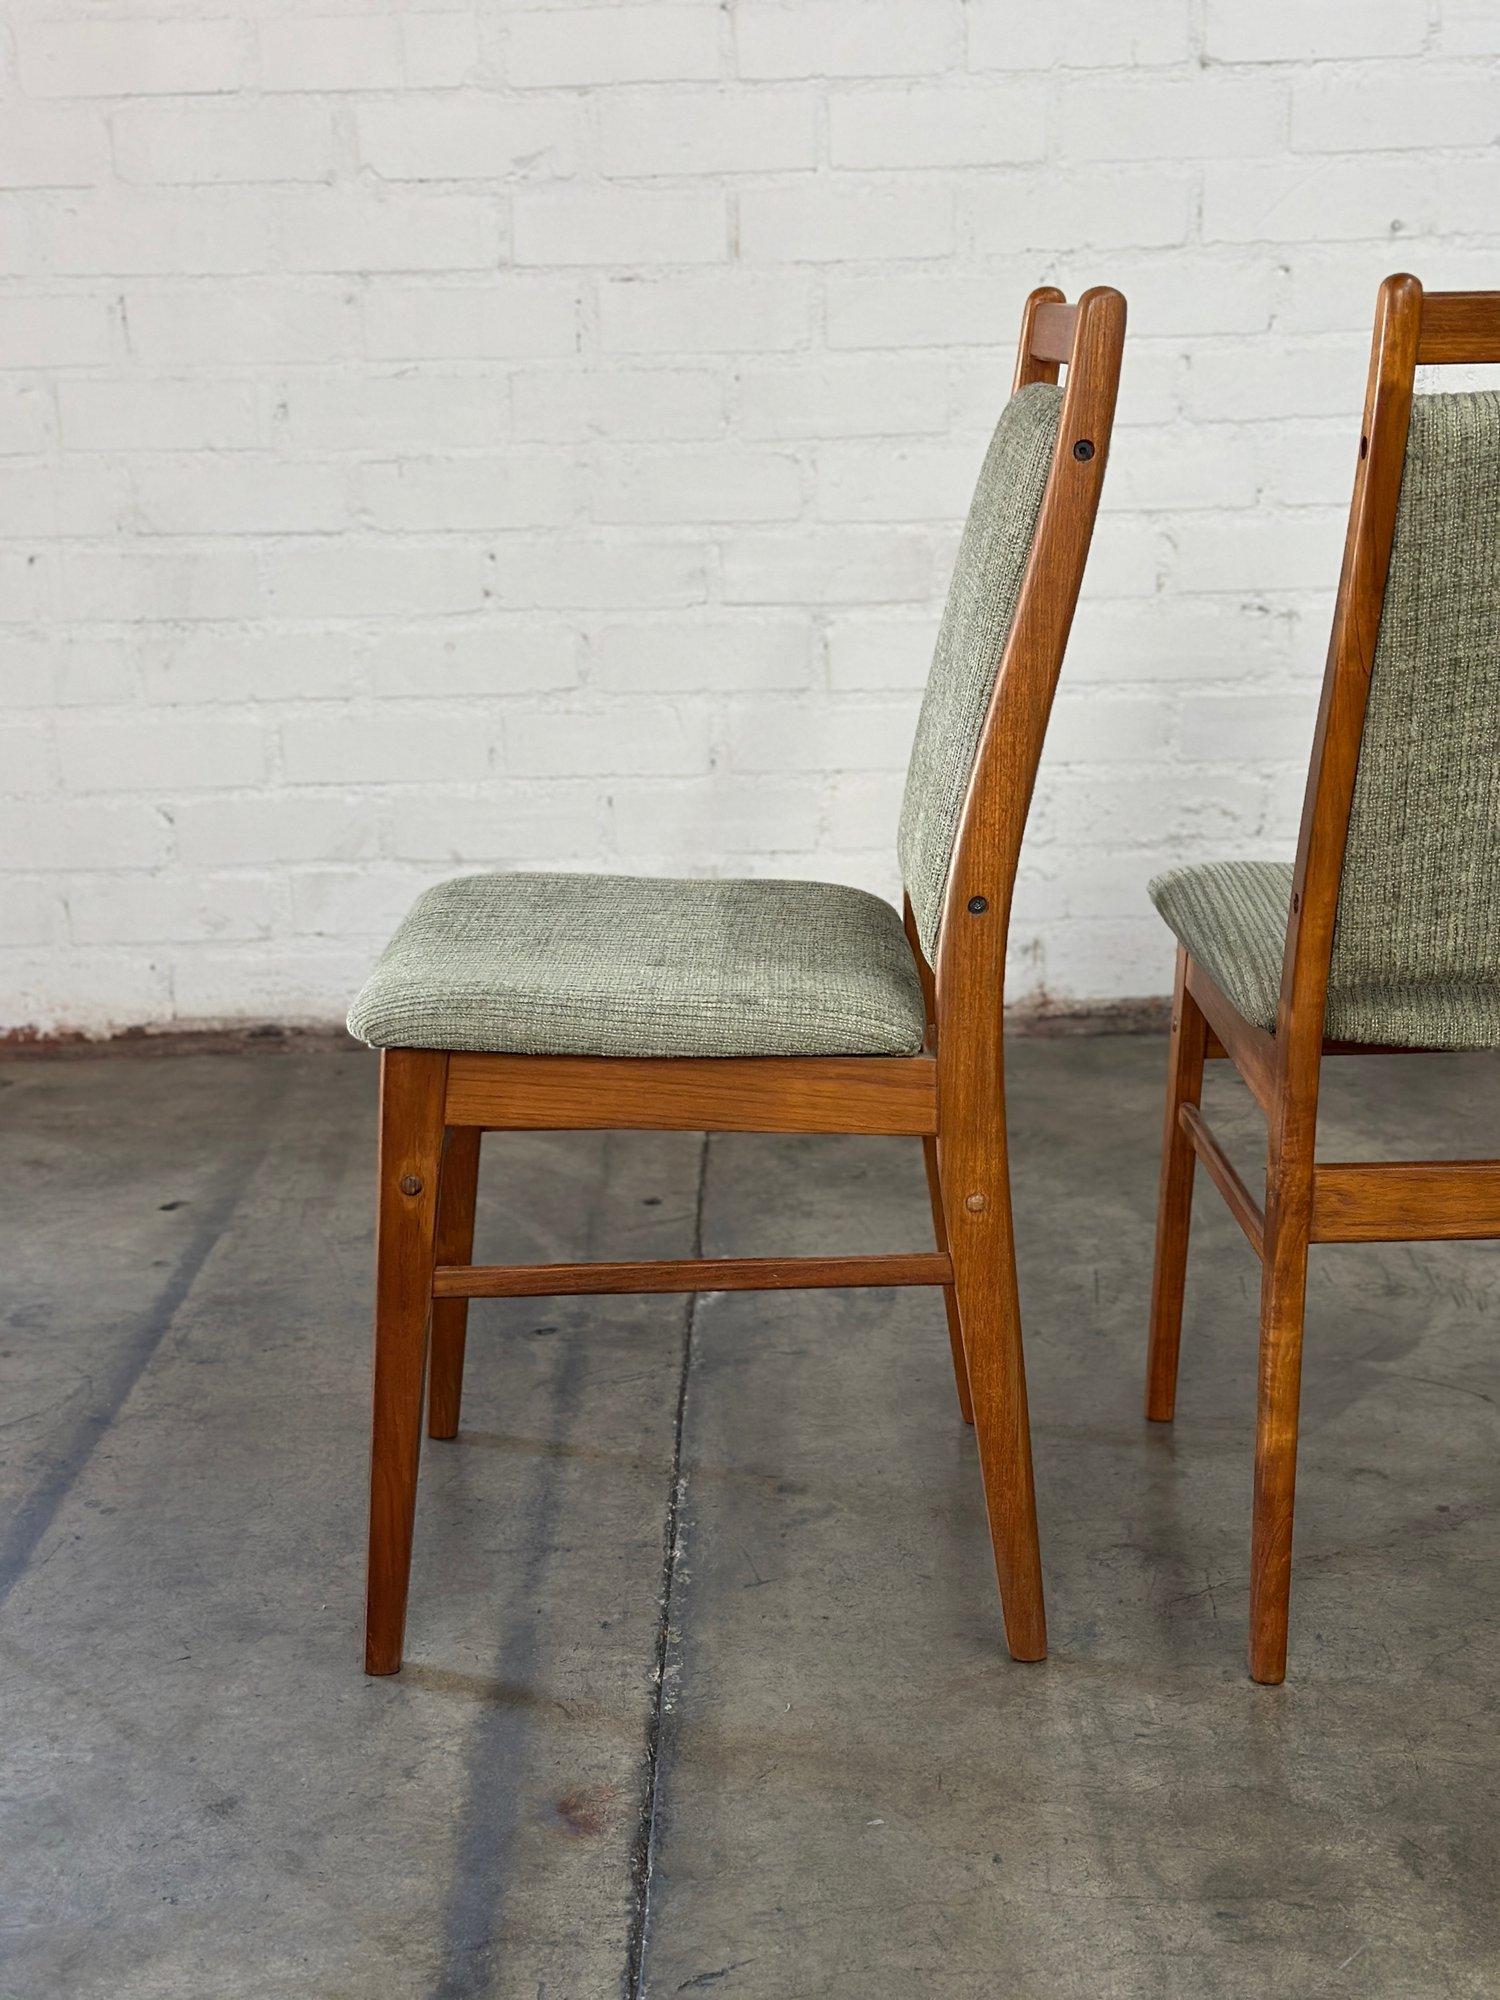 Mid-20th Century Danish Modern Teak Dining Chairs -set of Four For Sale